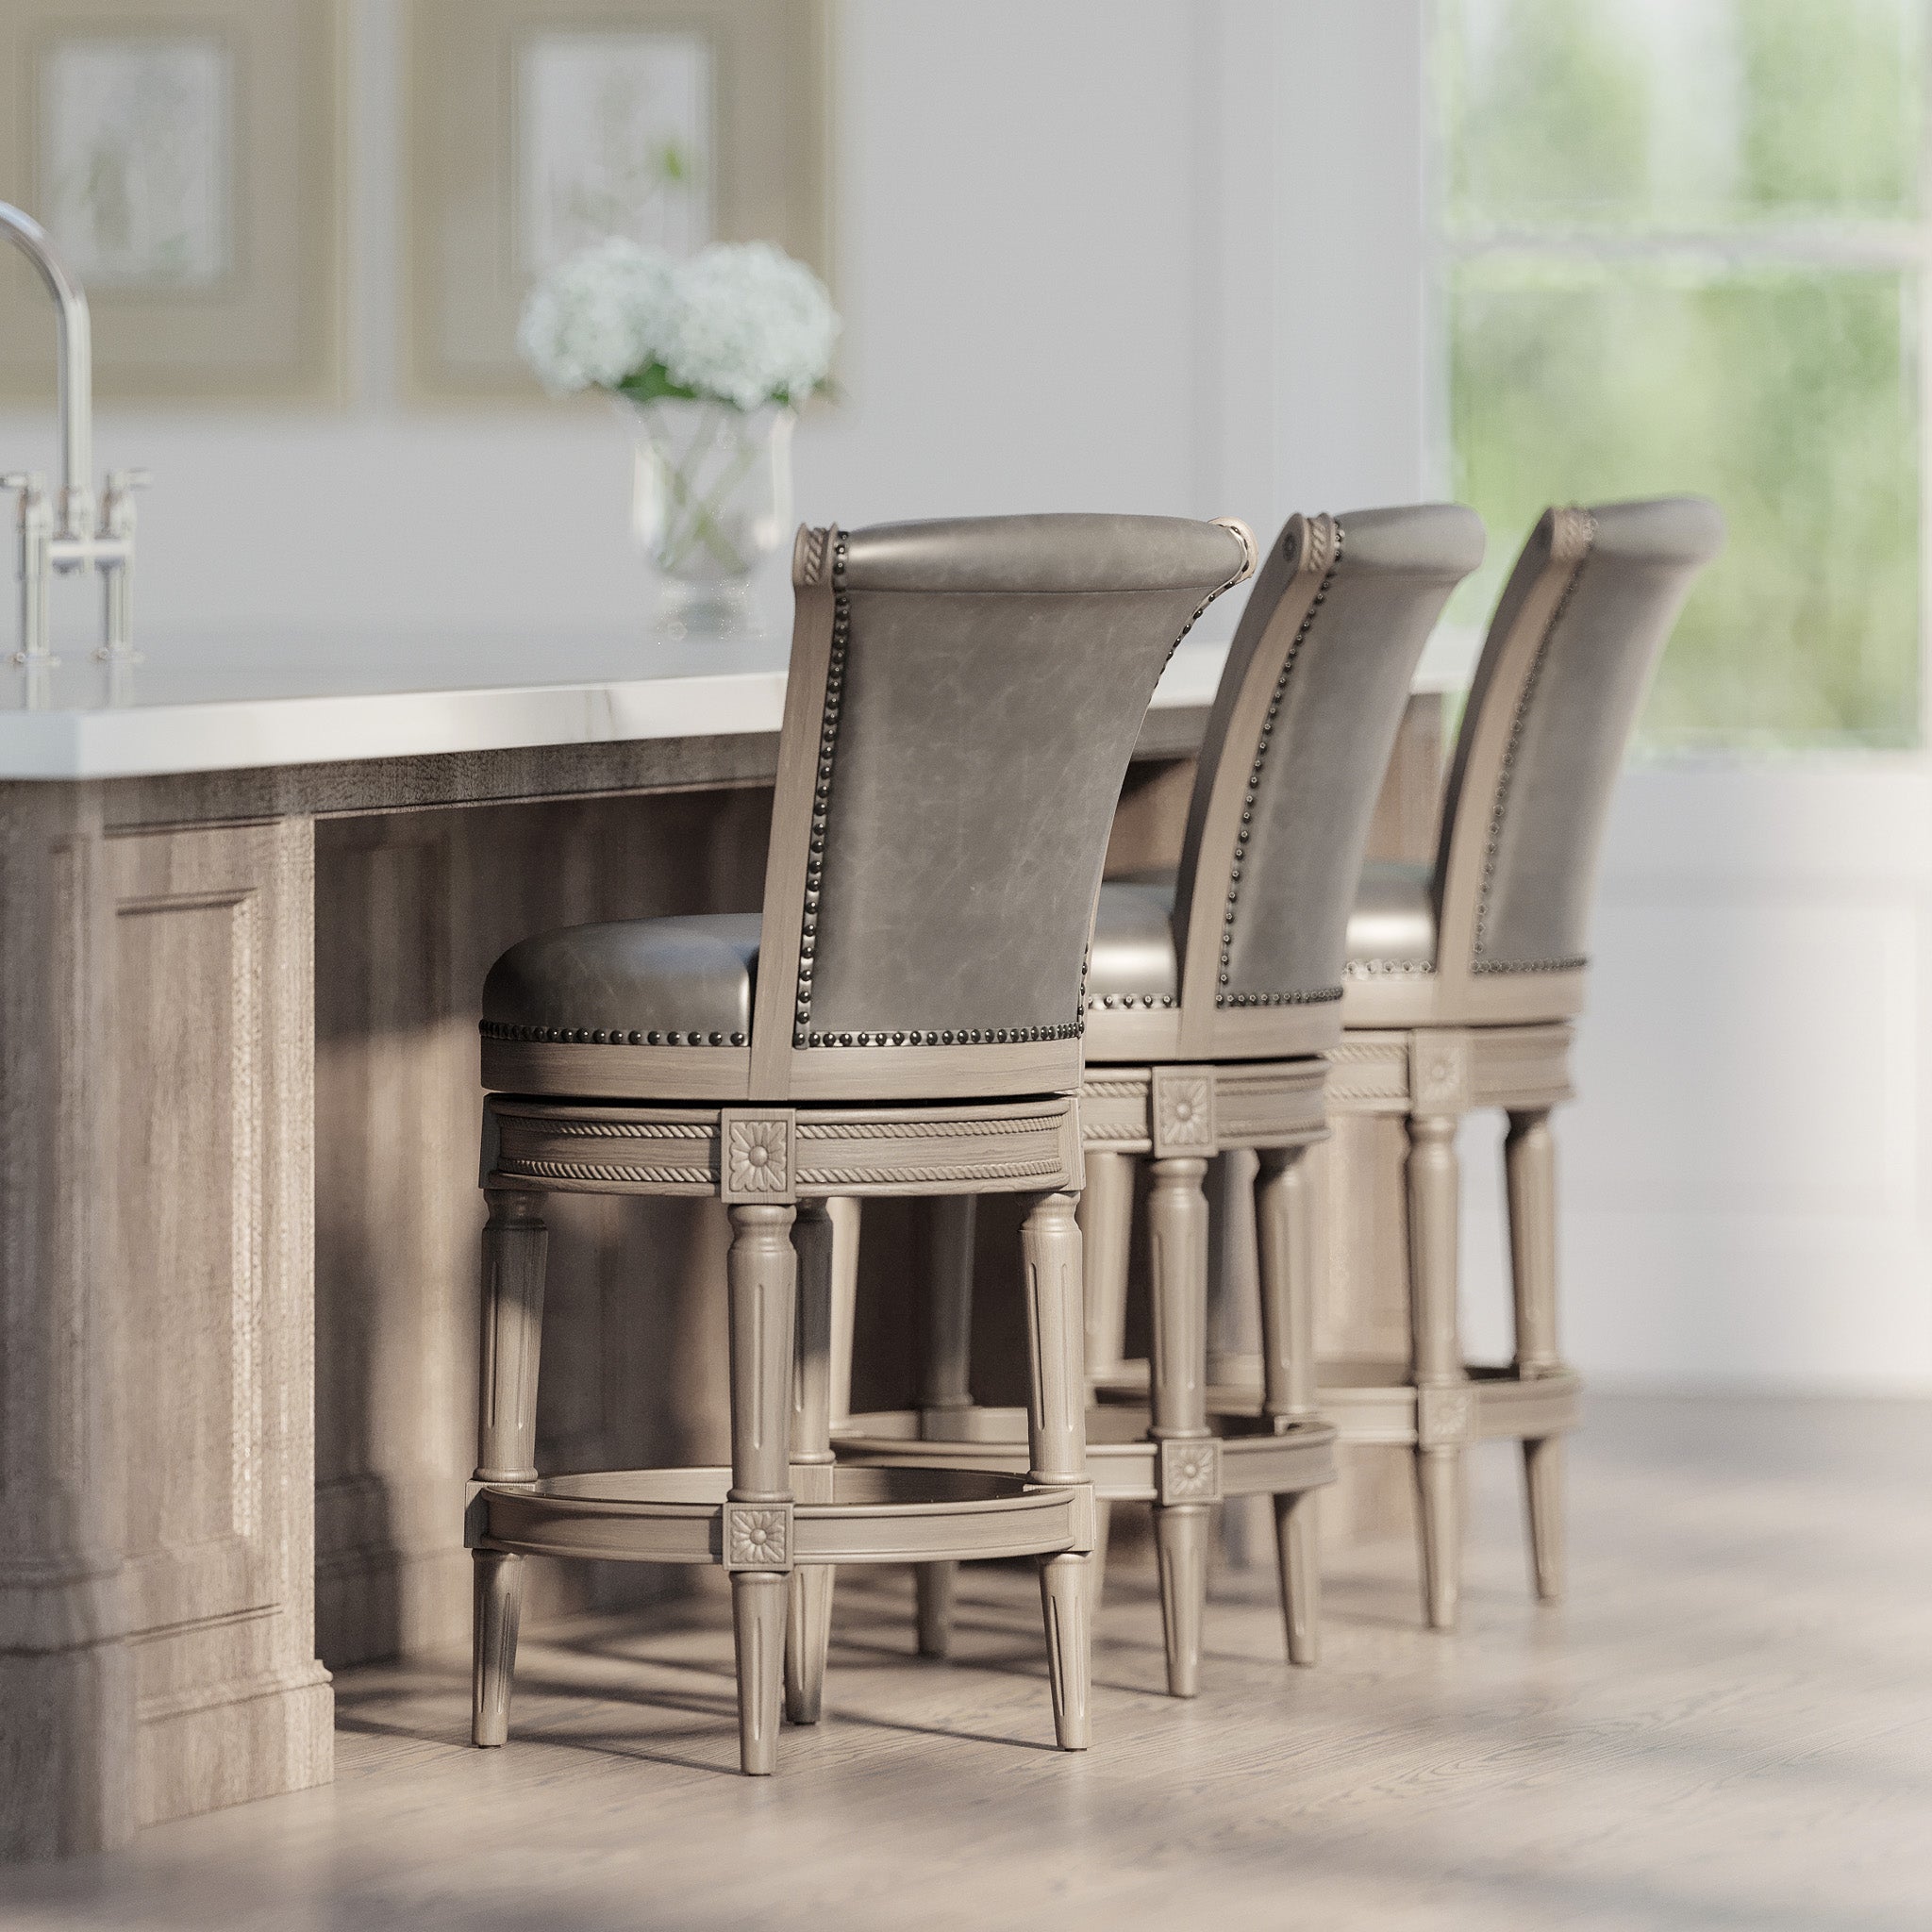 Pullman Counter Stool in Reclaimed Oak Finish with Ronan Stone Vegan Leather in Stools by Maven Lane